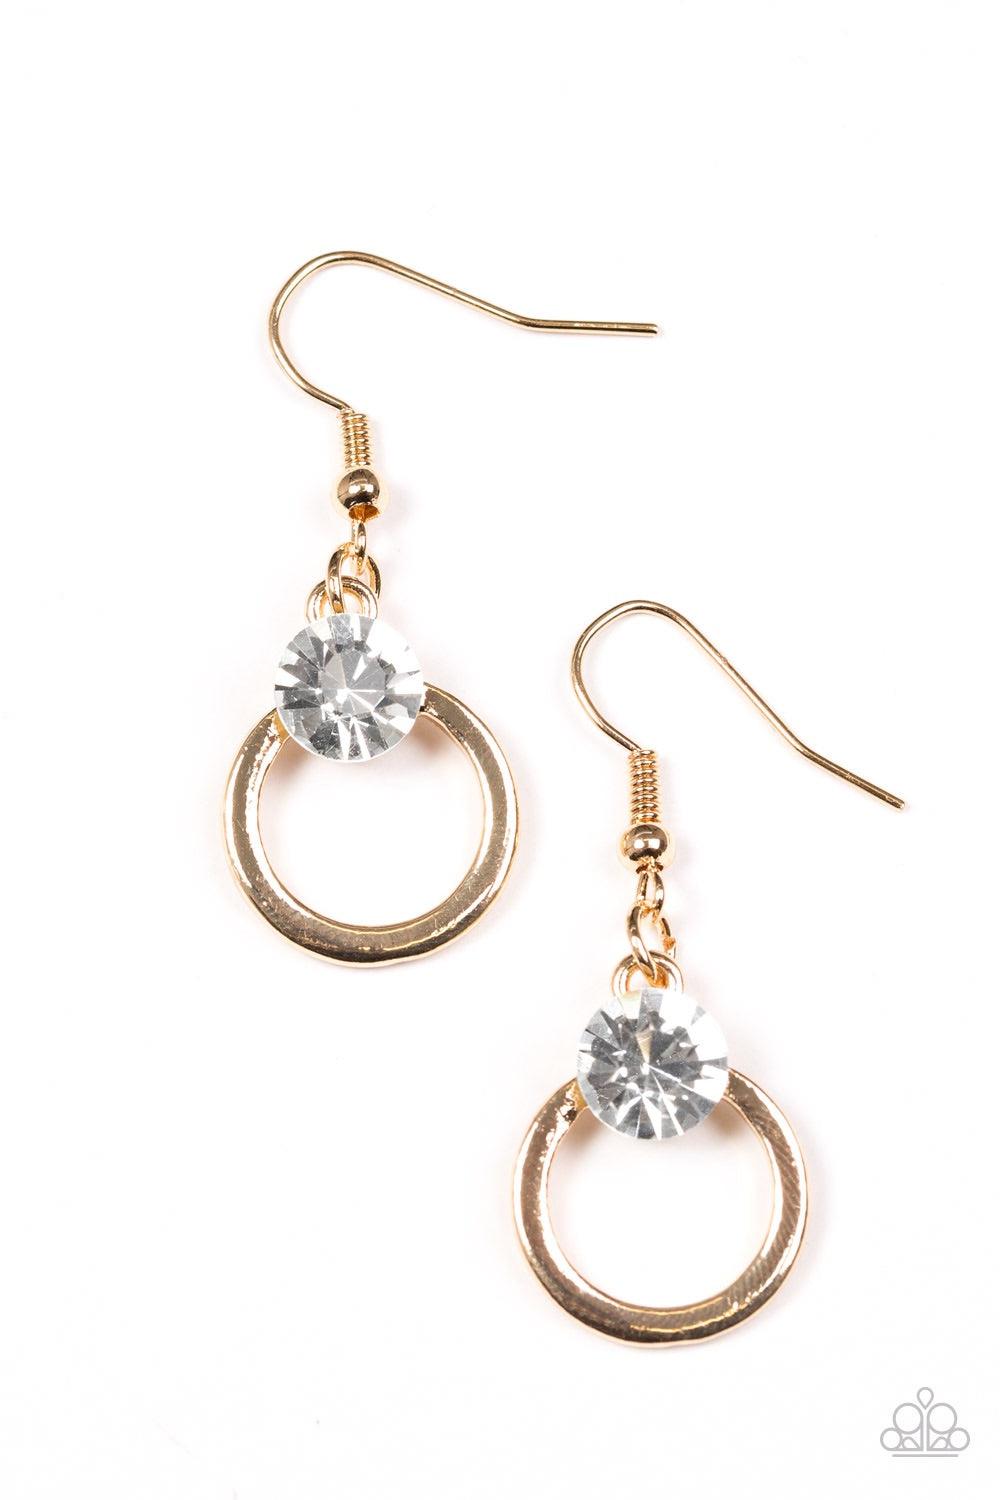 Paparazzi Accessories FAME On - Gold An oversized white rhinestone crowns the top of a glistening gold hoop for a refined look. Earring attaches to a standard fishhook fitting. Jewelry